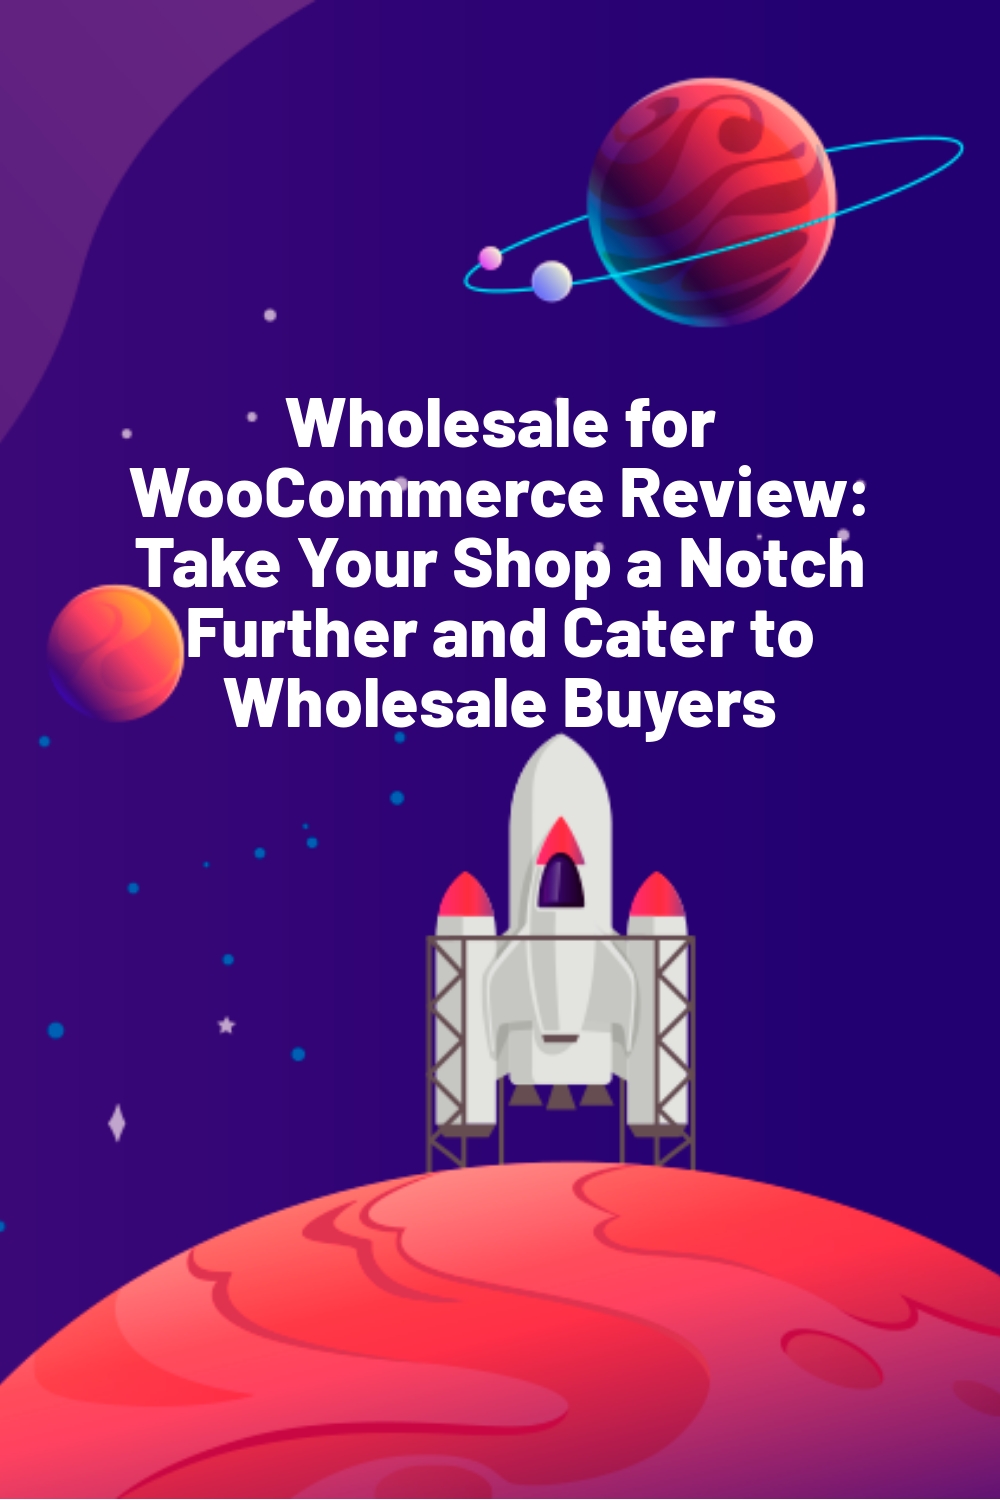 Wholesale for WooCommerce Review: Take Your Shop a Notch Further and Cater to Wholesale Buyers